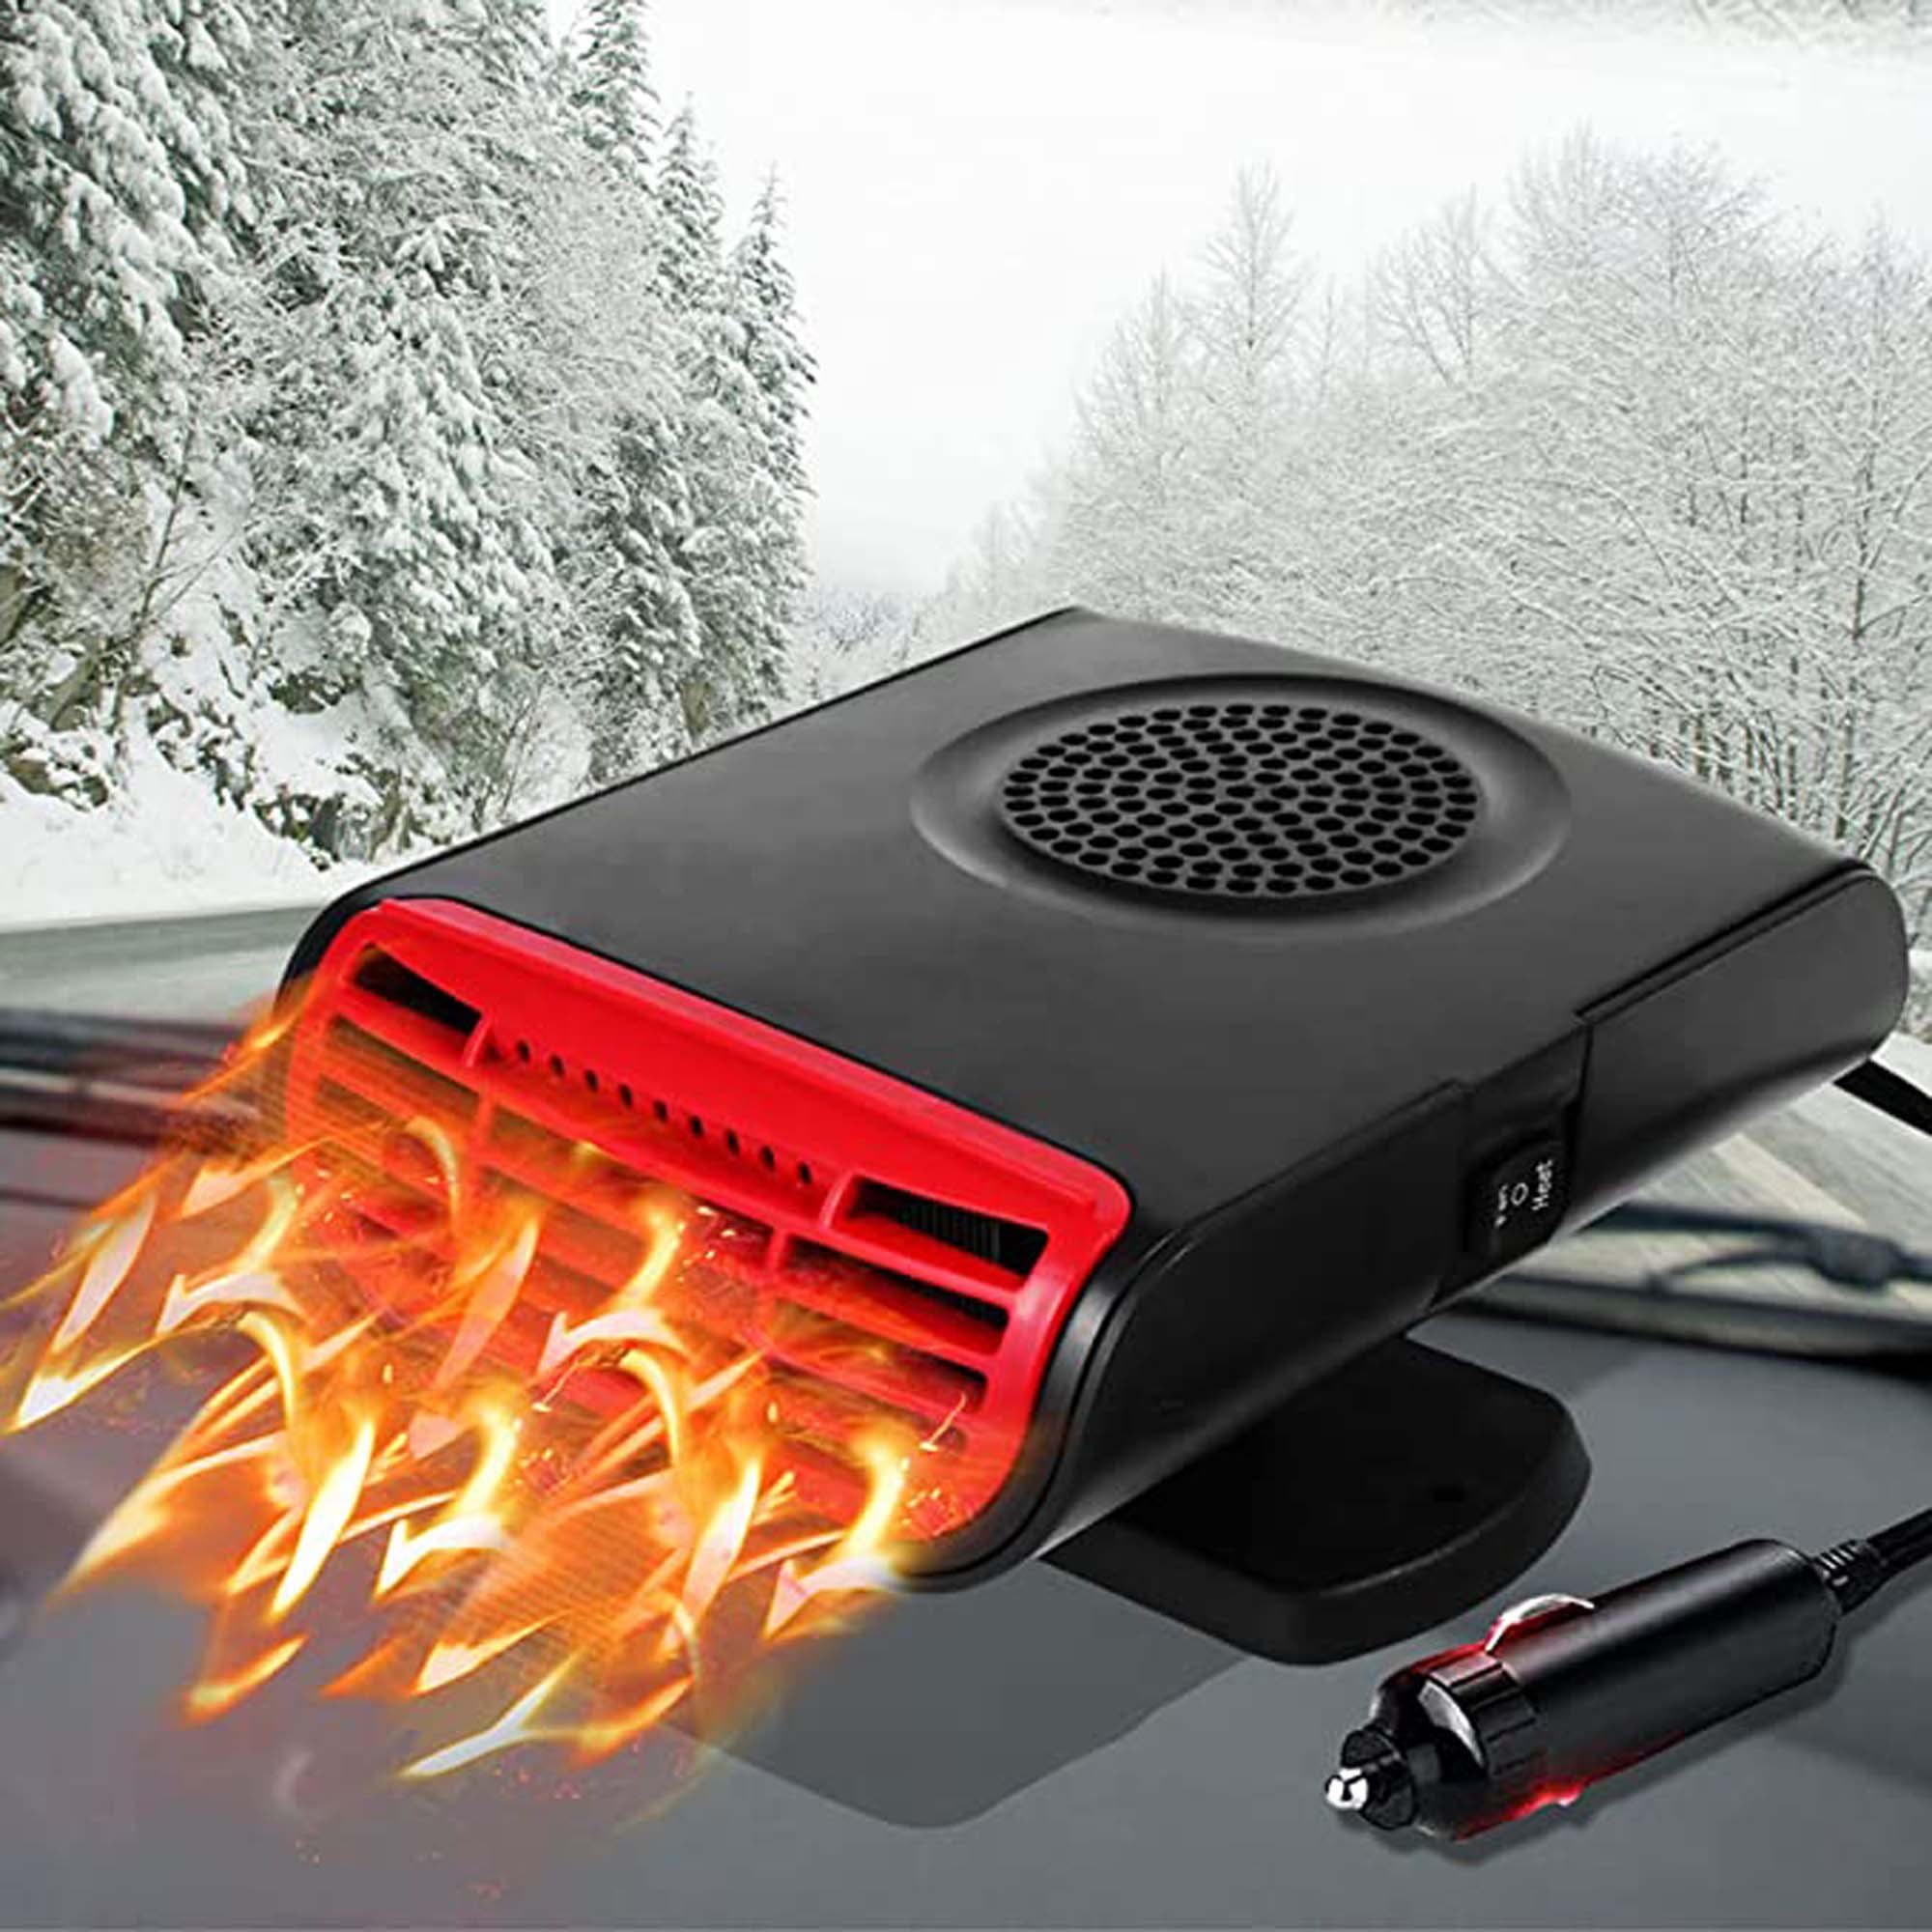 Car Heater, 12V Portable Car Heater for Car, Pickup Auto, Air Conditioners,  SUV, Jeeps, Trucks, 12 Volt Portable Car Heater and Defroster That Plugs